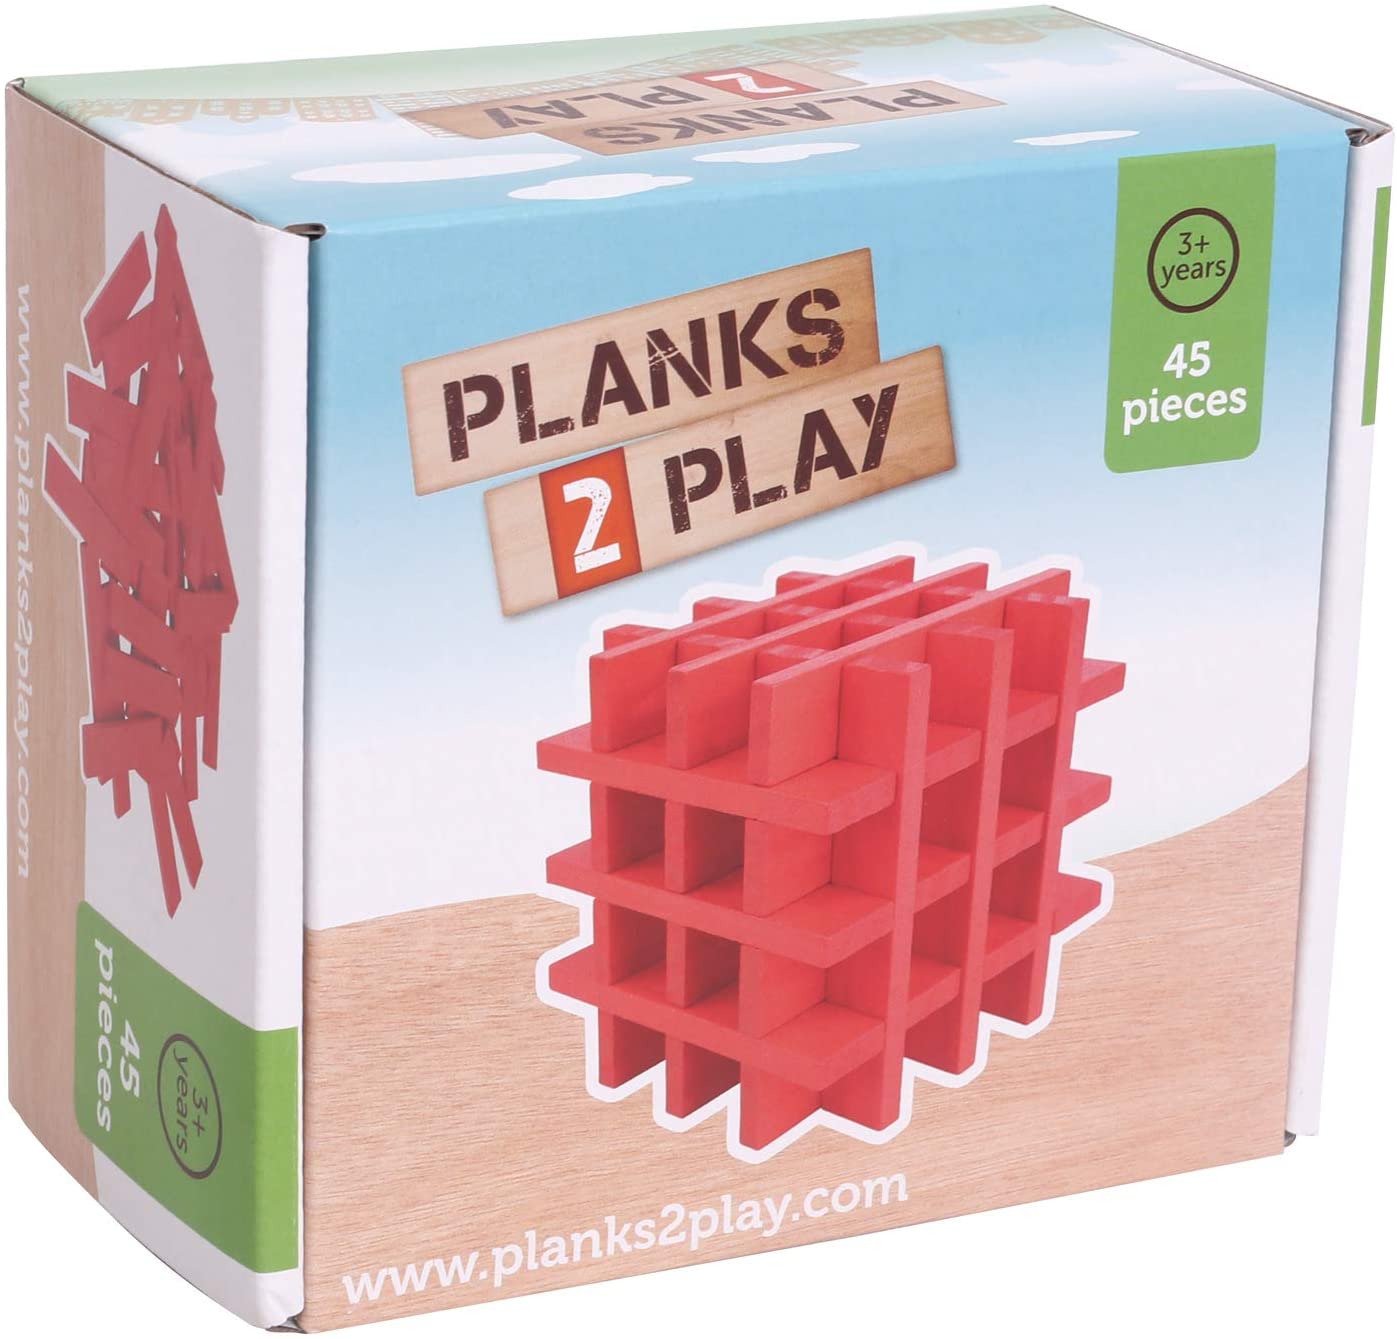 Planks 2 Play - 45 Planks - Red